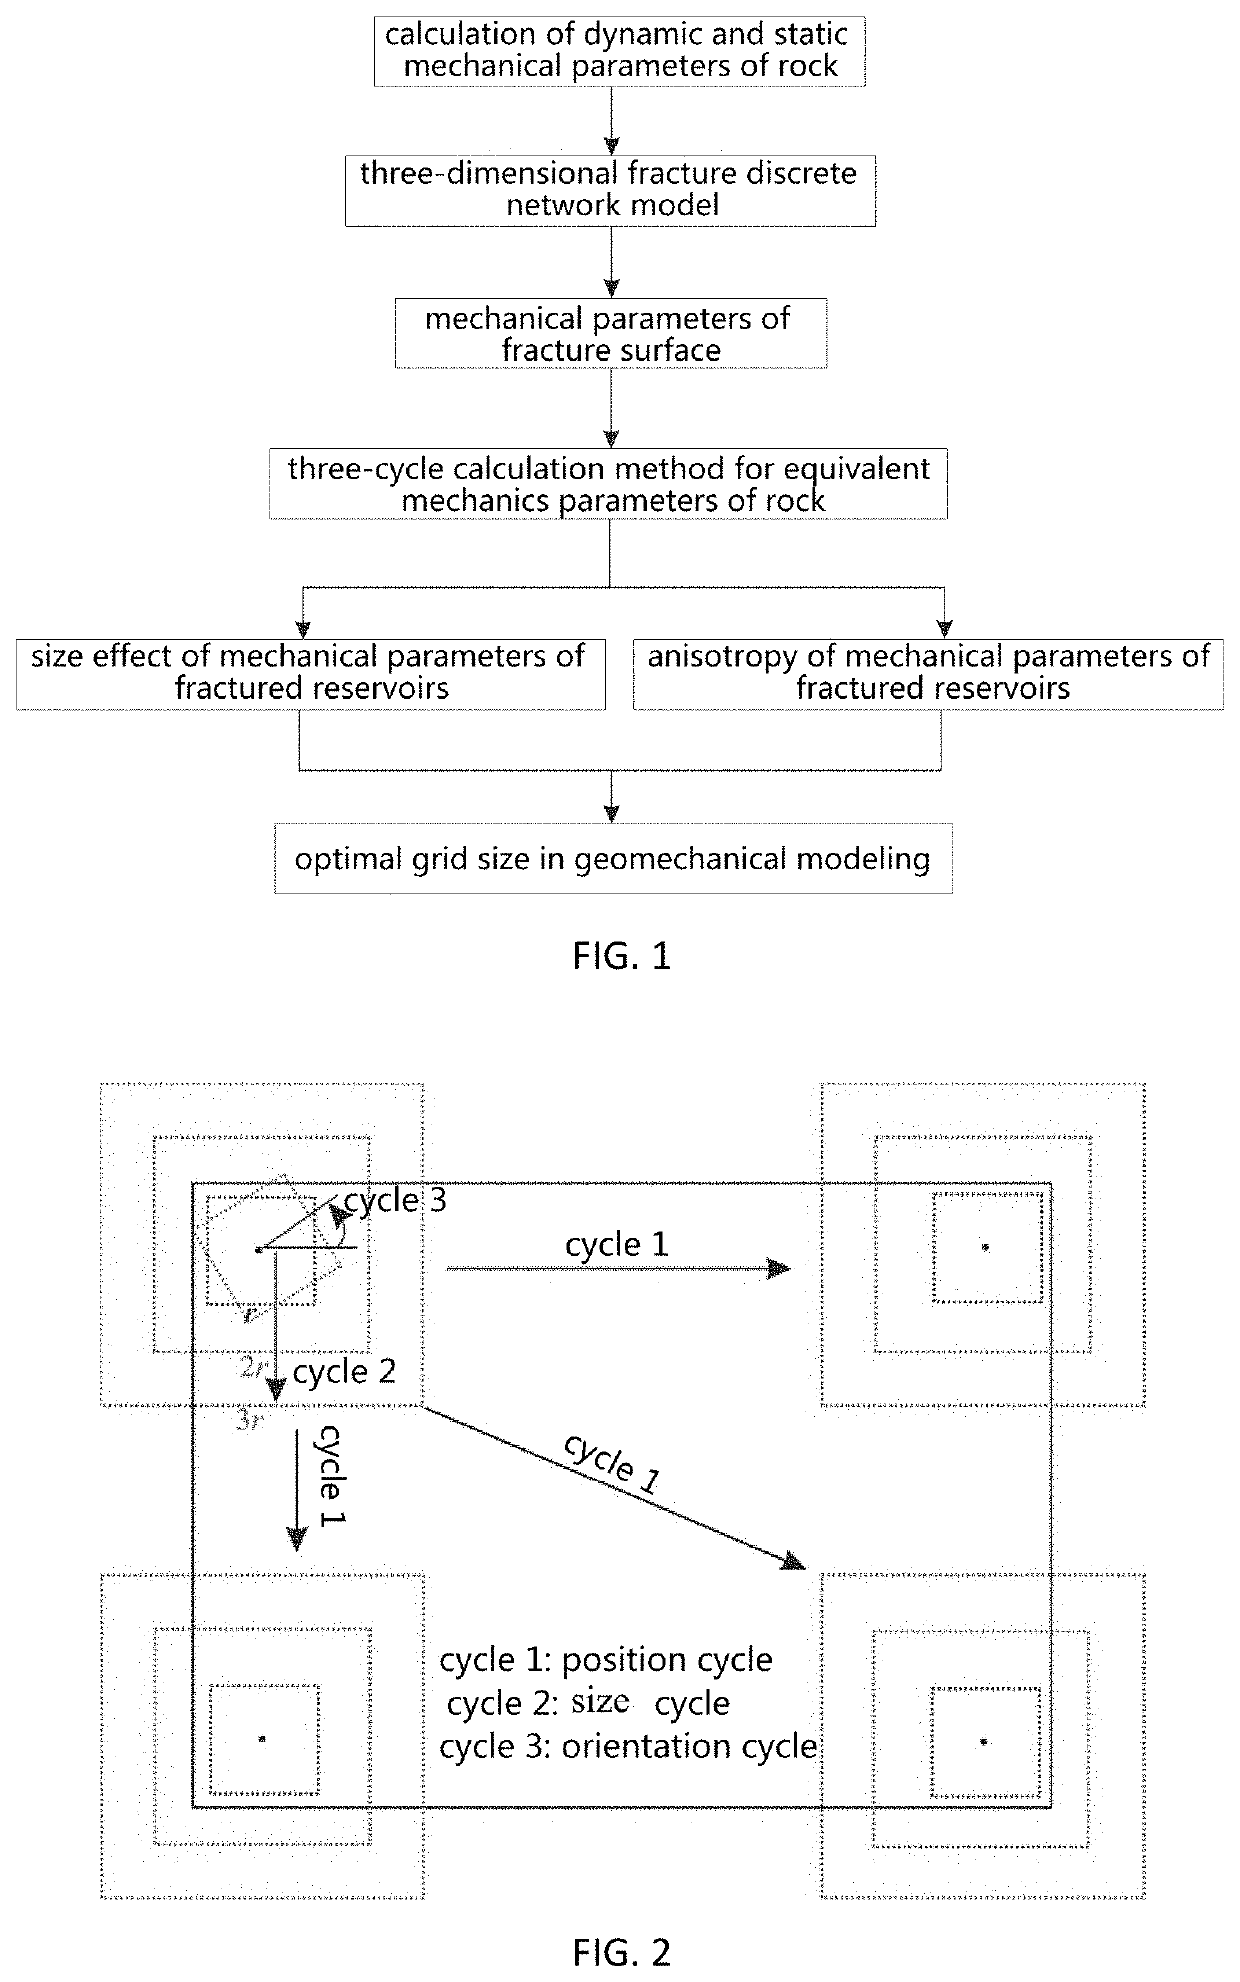 Method for determining a grid cell size in geomechanical modeling of fractured reservoirs